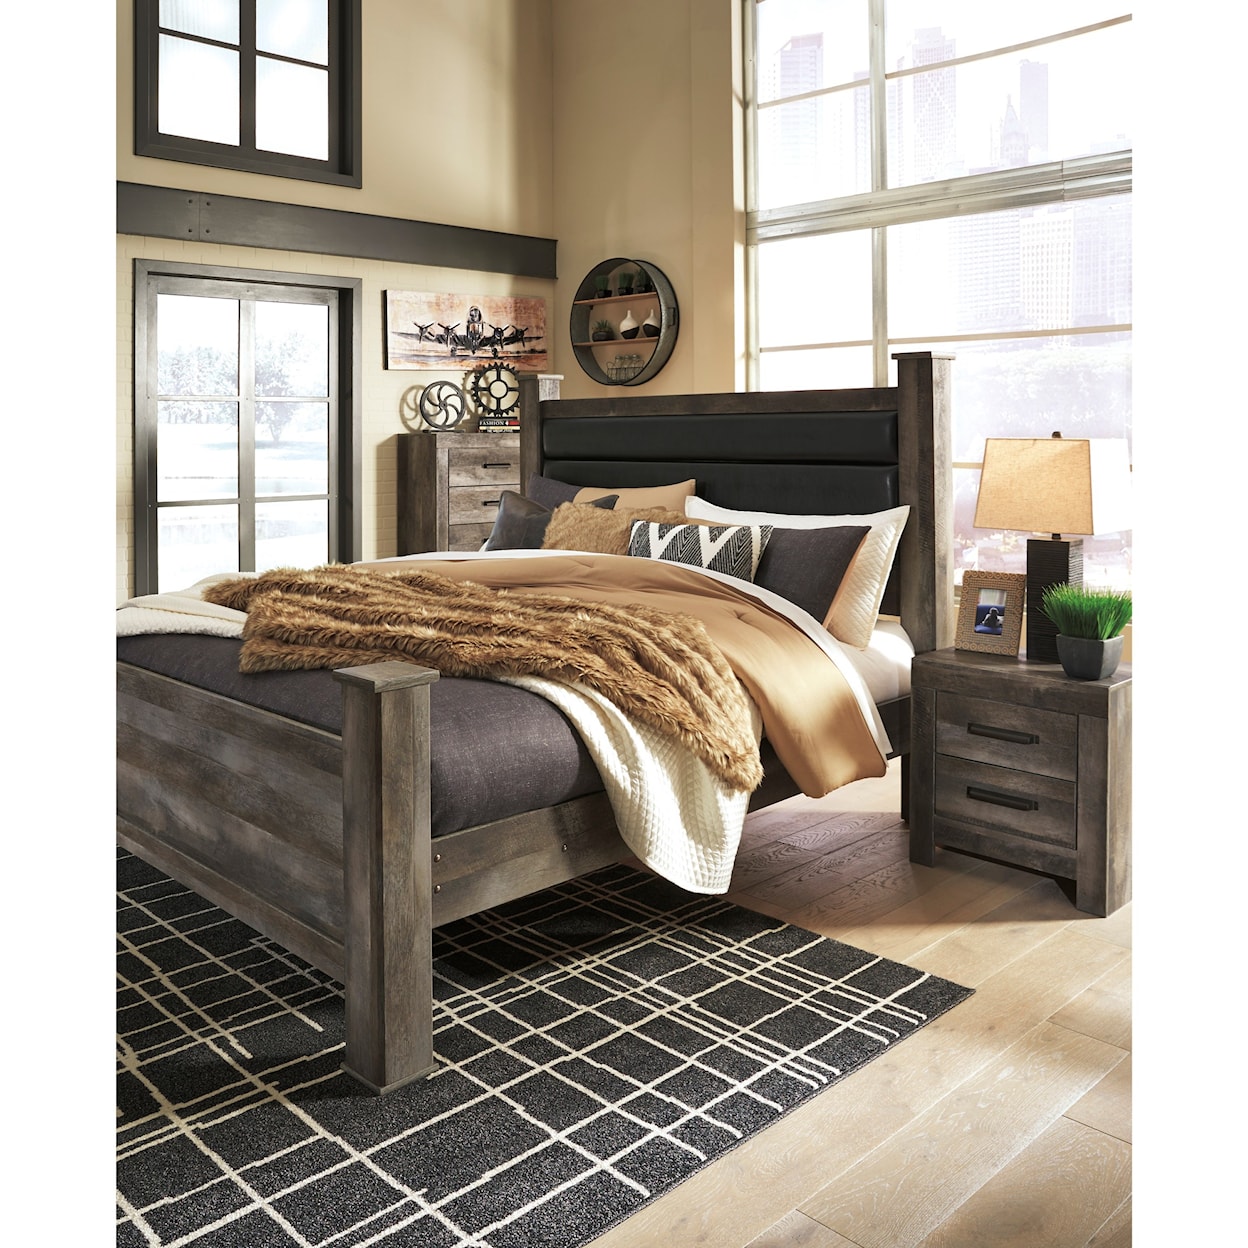 Signature Design by Ashley Wynnlow Queen Poster Bed w/ Upholstered Headboard